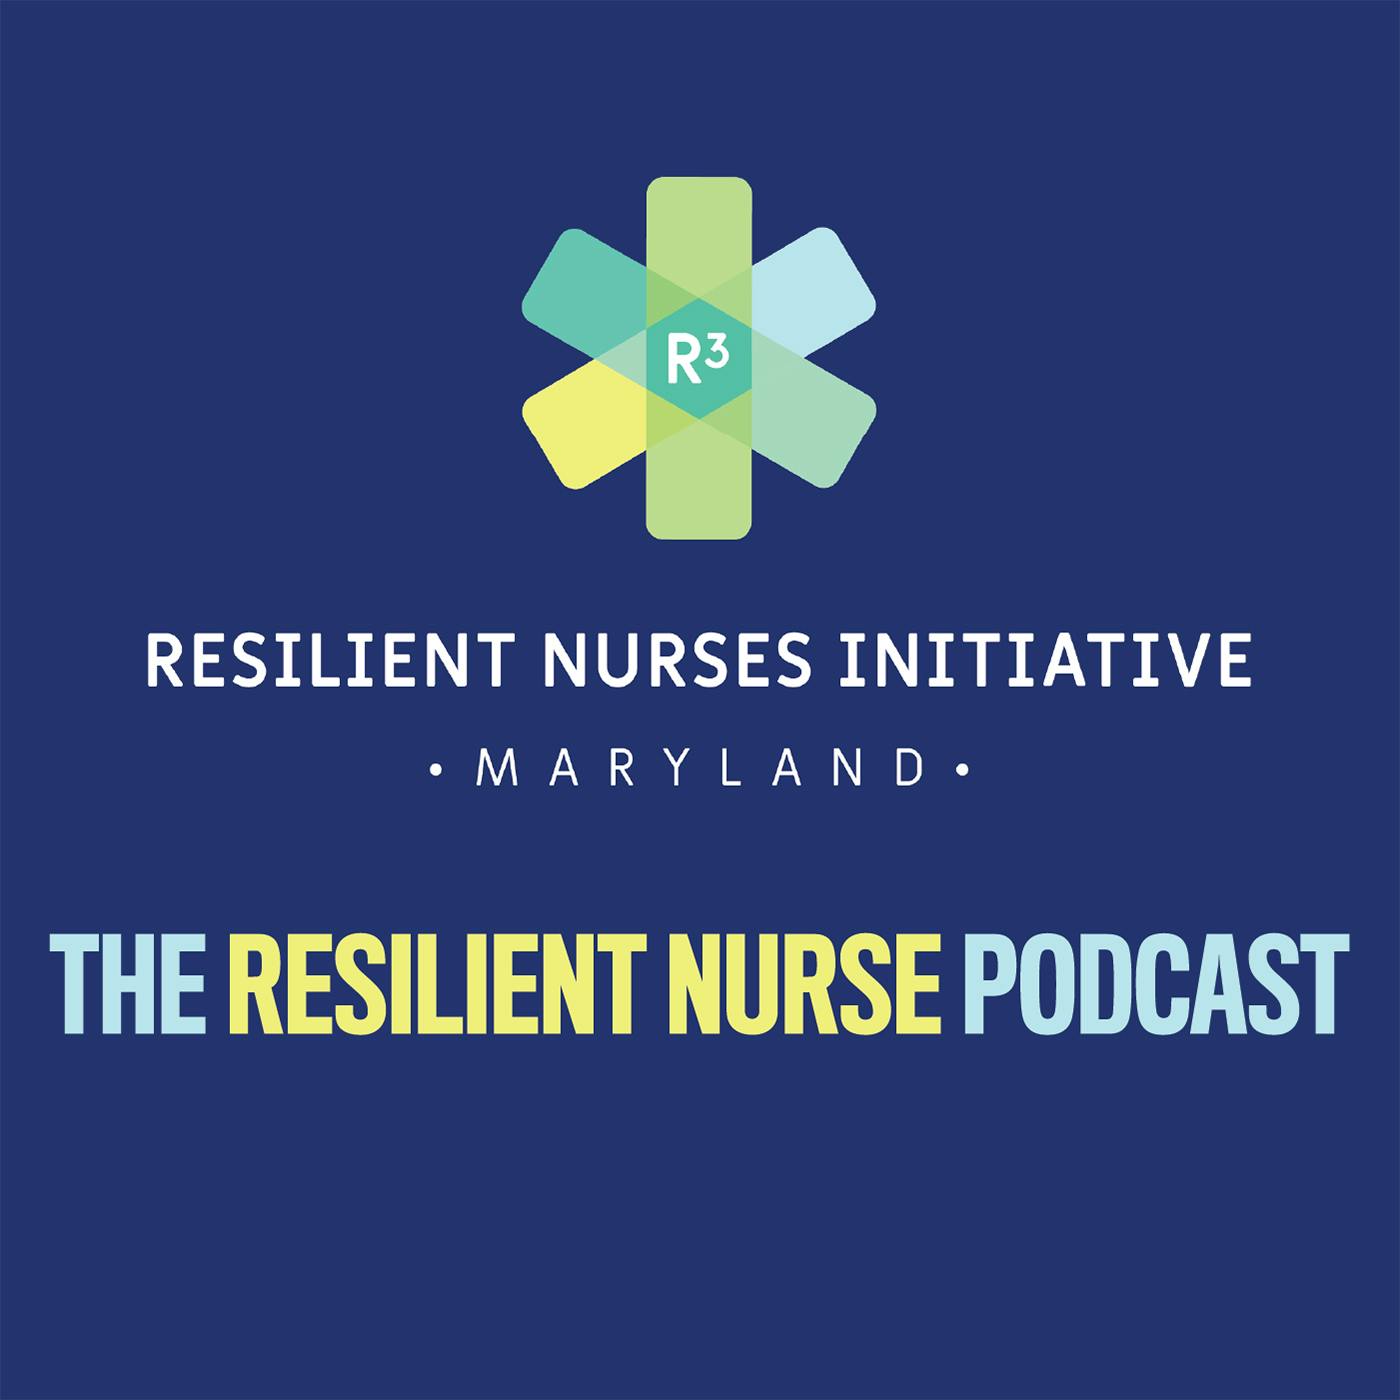 The Resilient Nurse, Episode 5: Overcoming Incivility